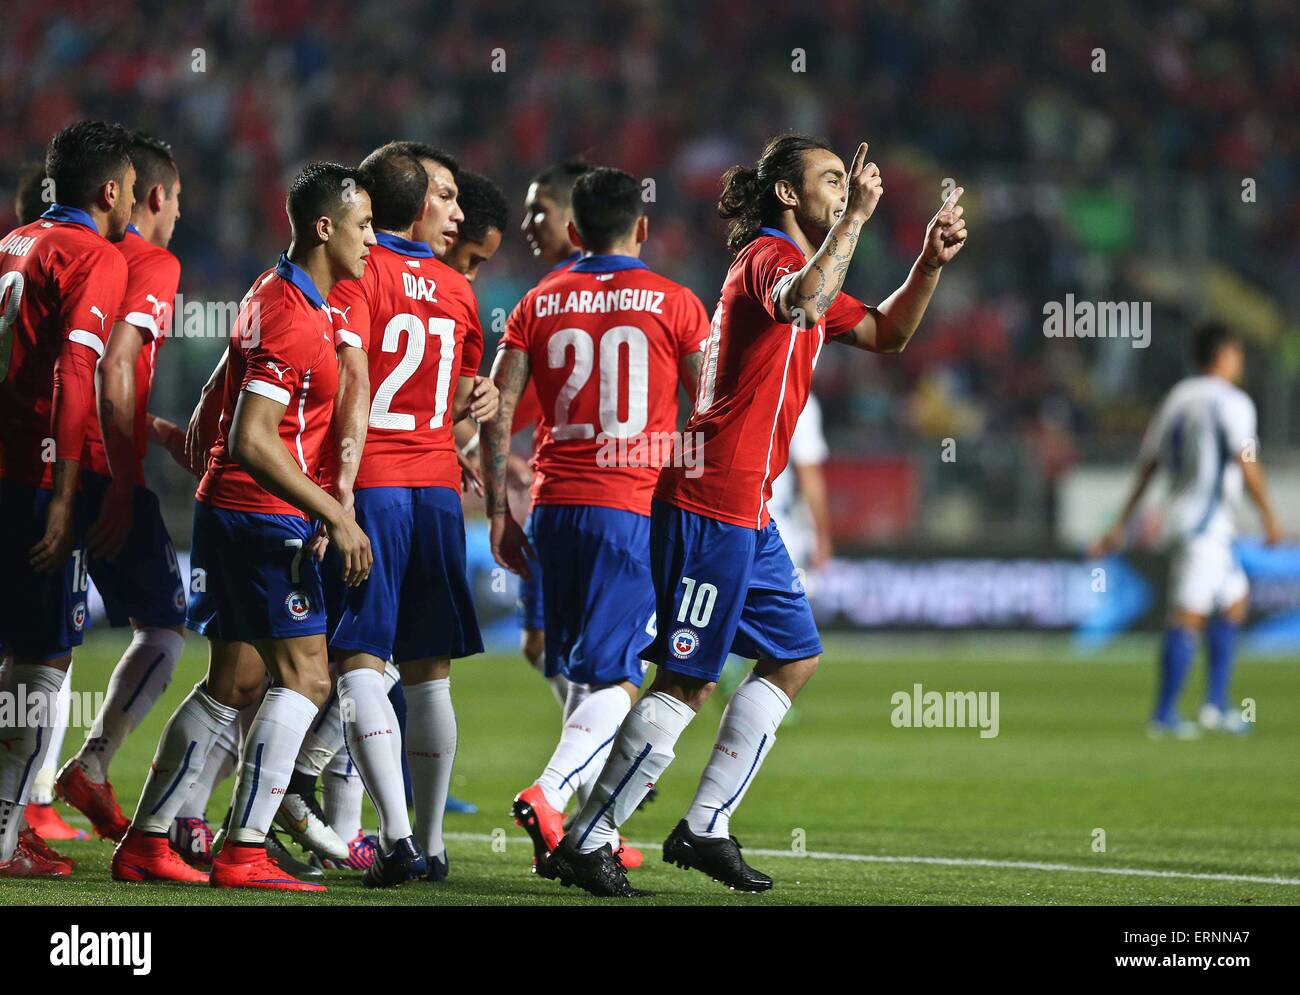 Rancagua, Chile. 5th June, 2015. Image provided by Chile's National Association of Professional Soccer (ANFP) shows Chile's Jorge Valdivia (R) celebrating his goal during a friendly match at the El Teniente Stadium in Rancagua, Chile, on June 5, 2015. Credit:  ANFP/Xinhua/Alamy Live News Stock Photo